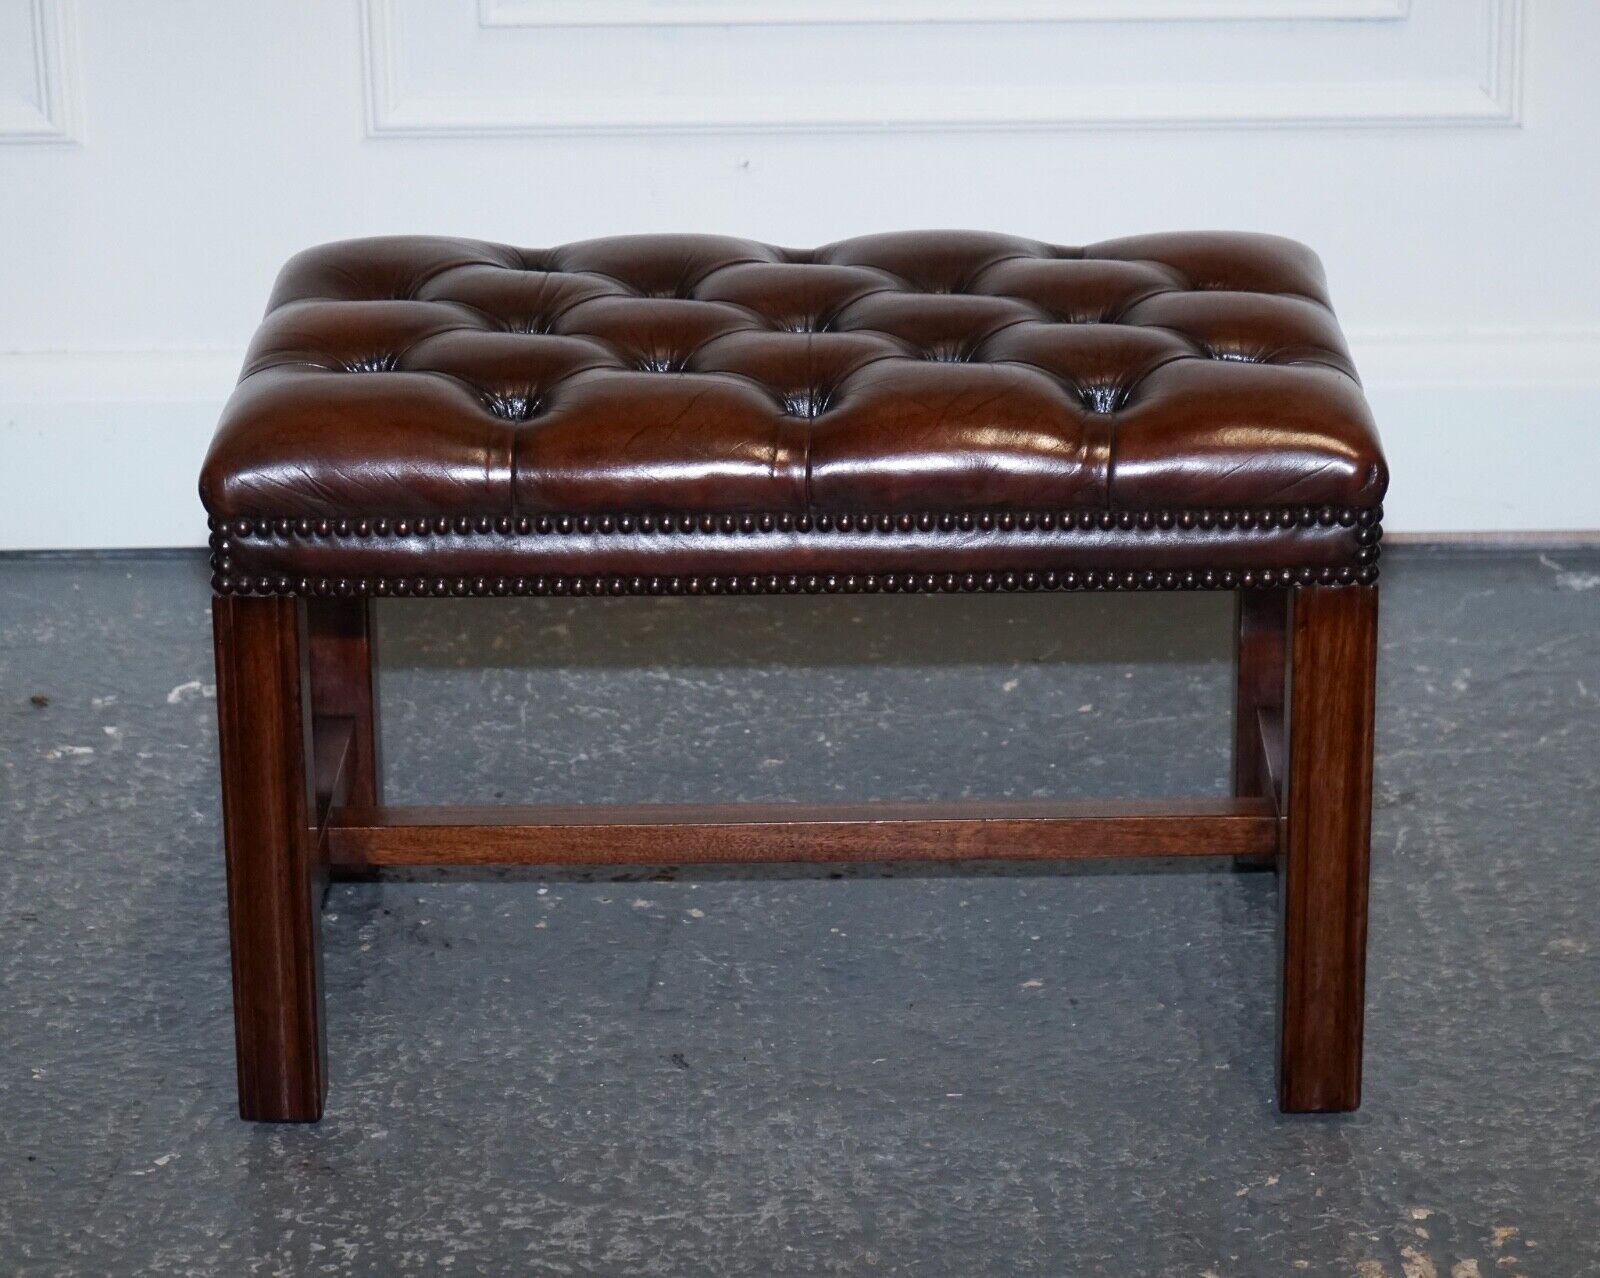 VINTAGE FULLY RESTORED CHESTERFIELD HAND DYED BROWN LEATHER TUFFED FOOTSTOOL